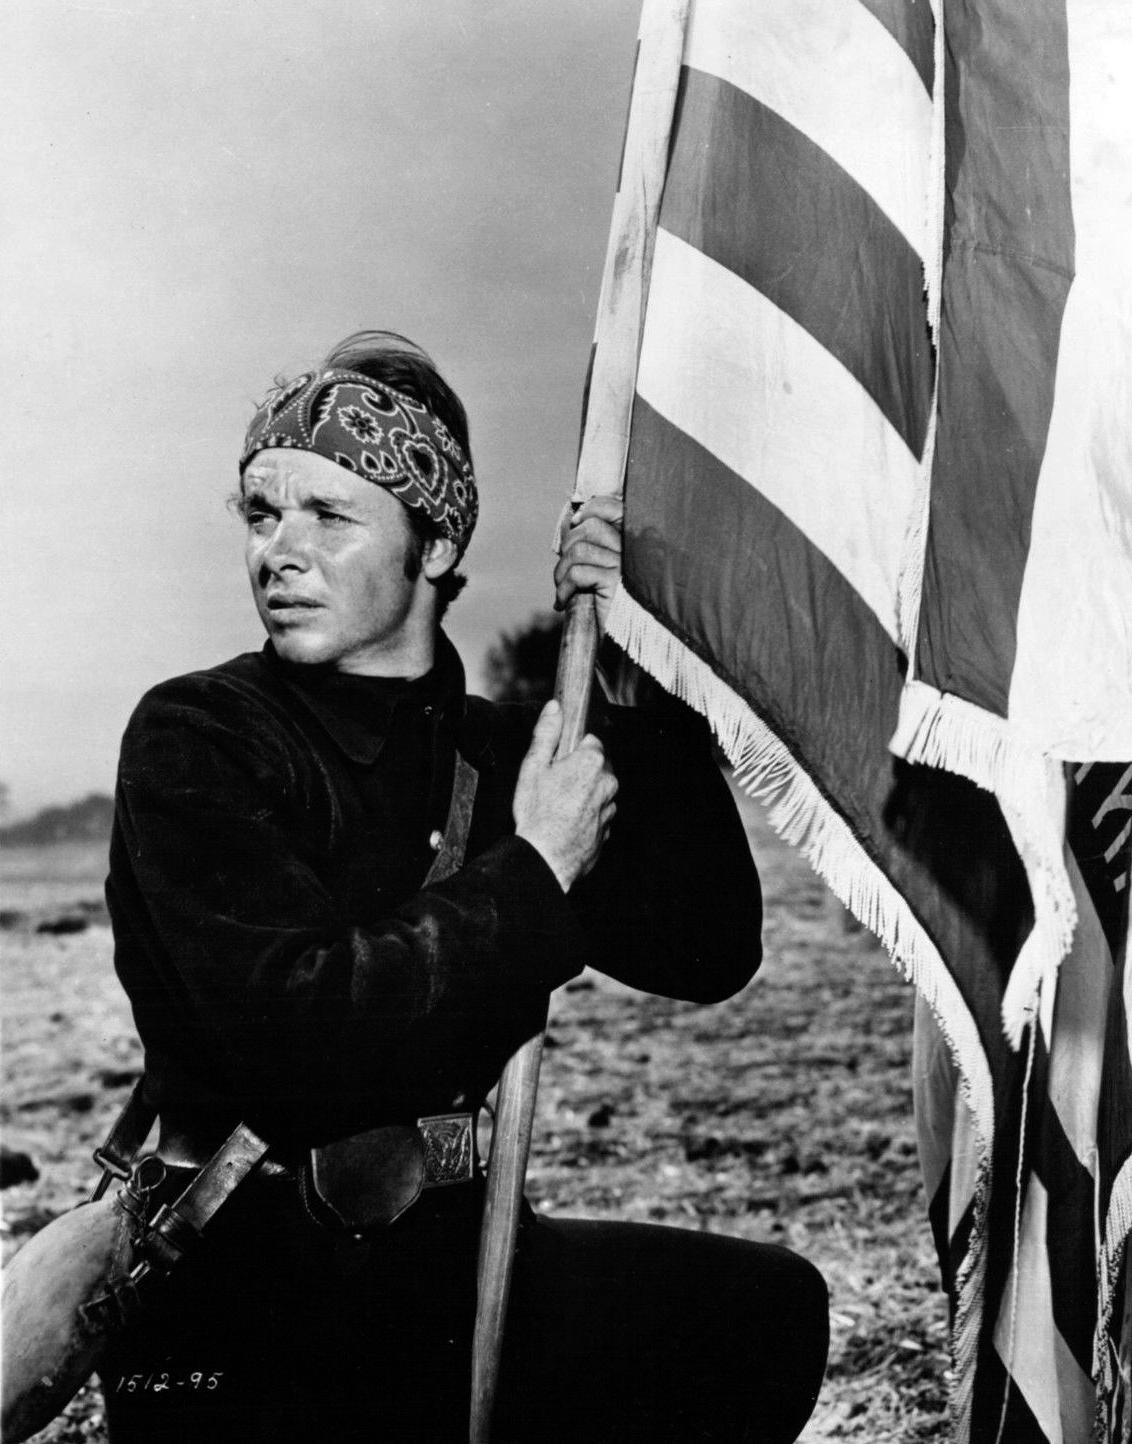 Audie Murphy in "The Red Badge of Courage" (1951). (Public Domain)